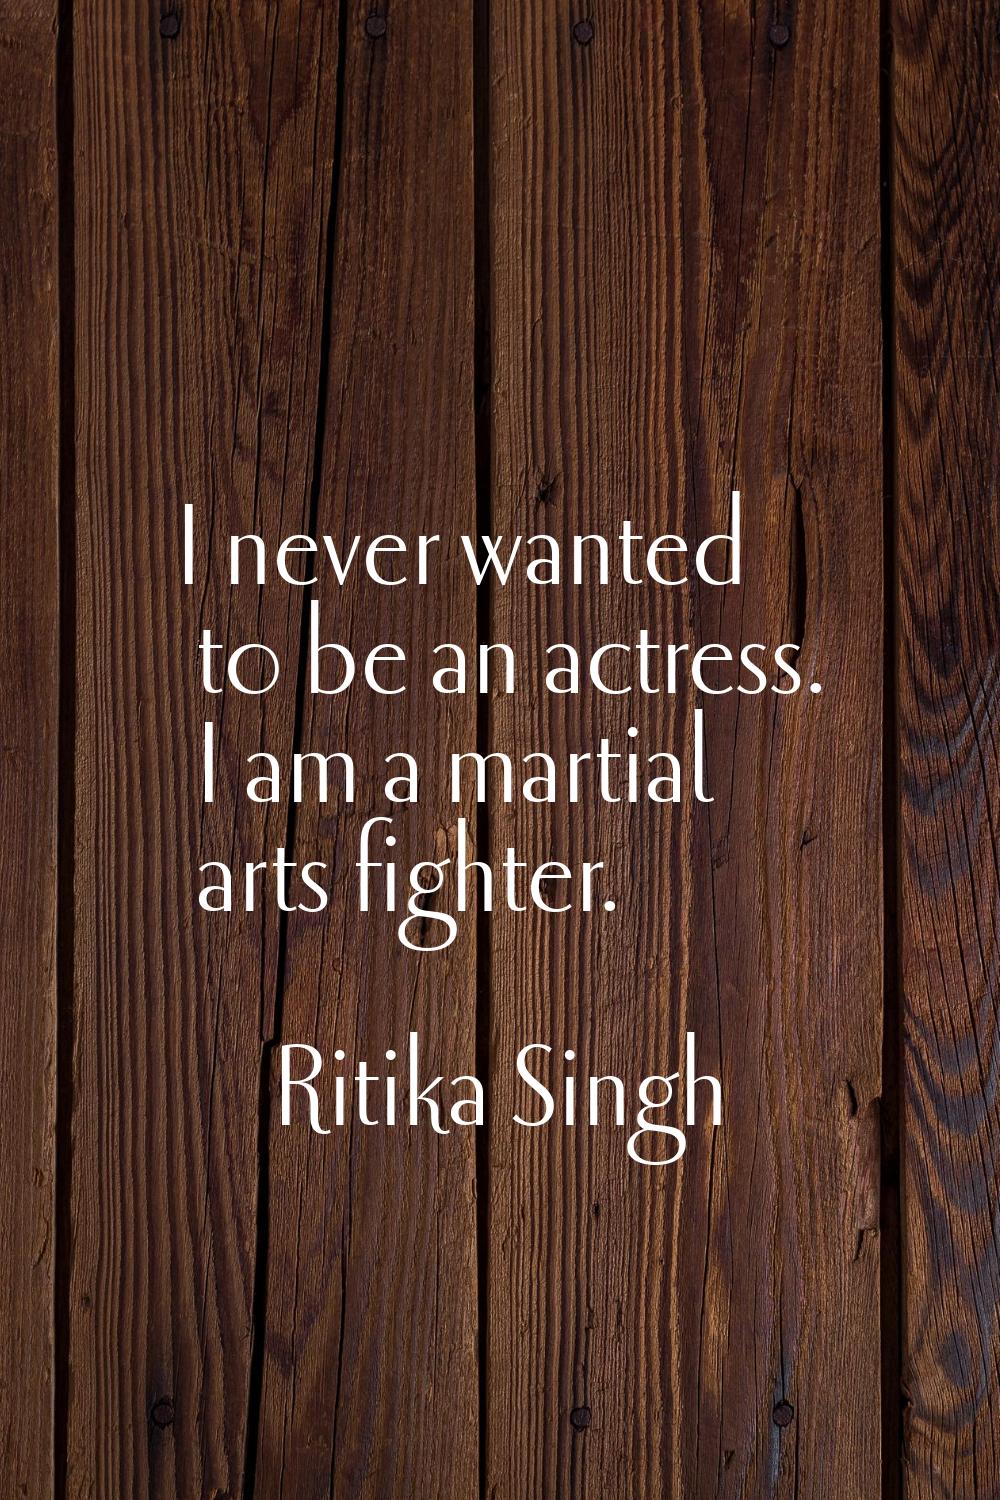 I never wanted to be an actress. I am a martial arts fighter.